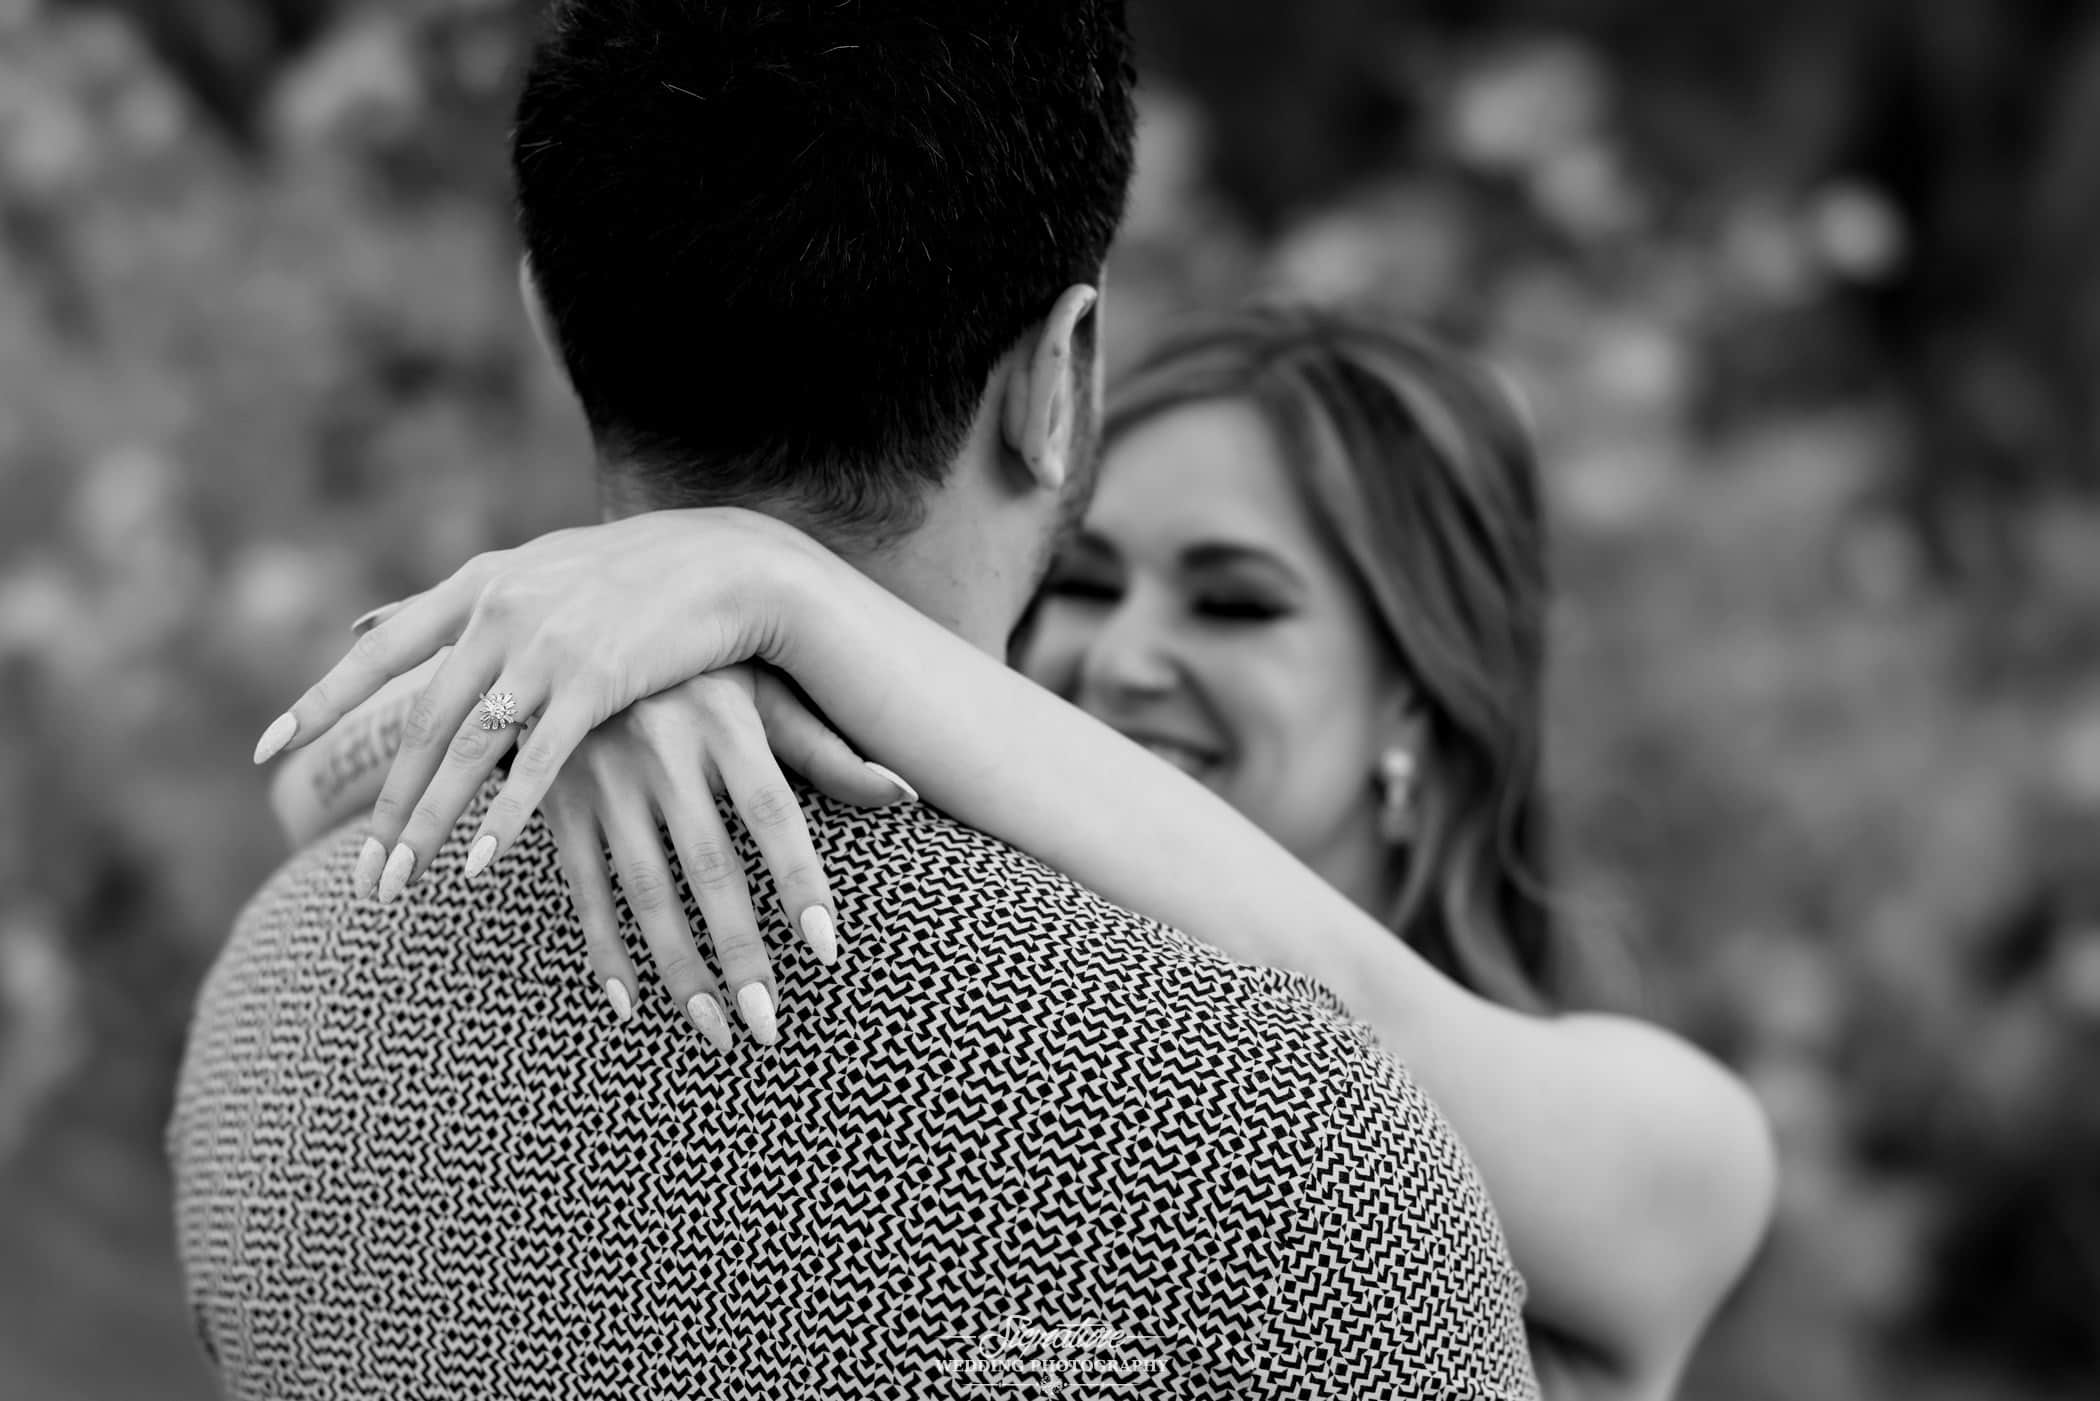 Woman's arm around man's shoulders black and white